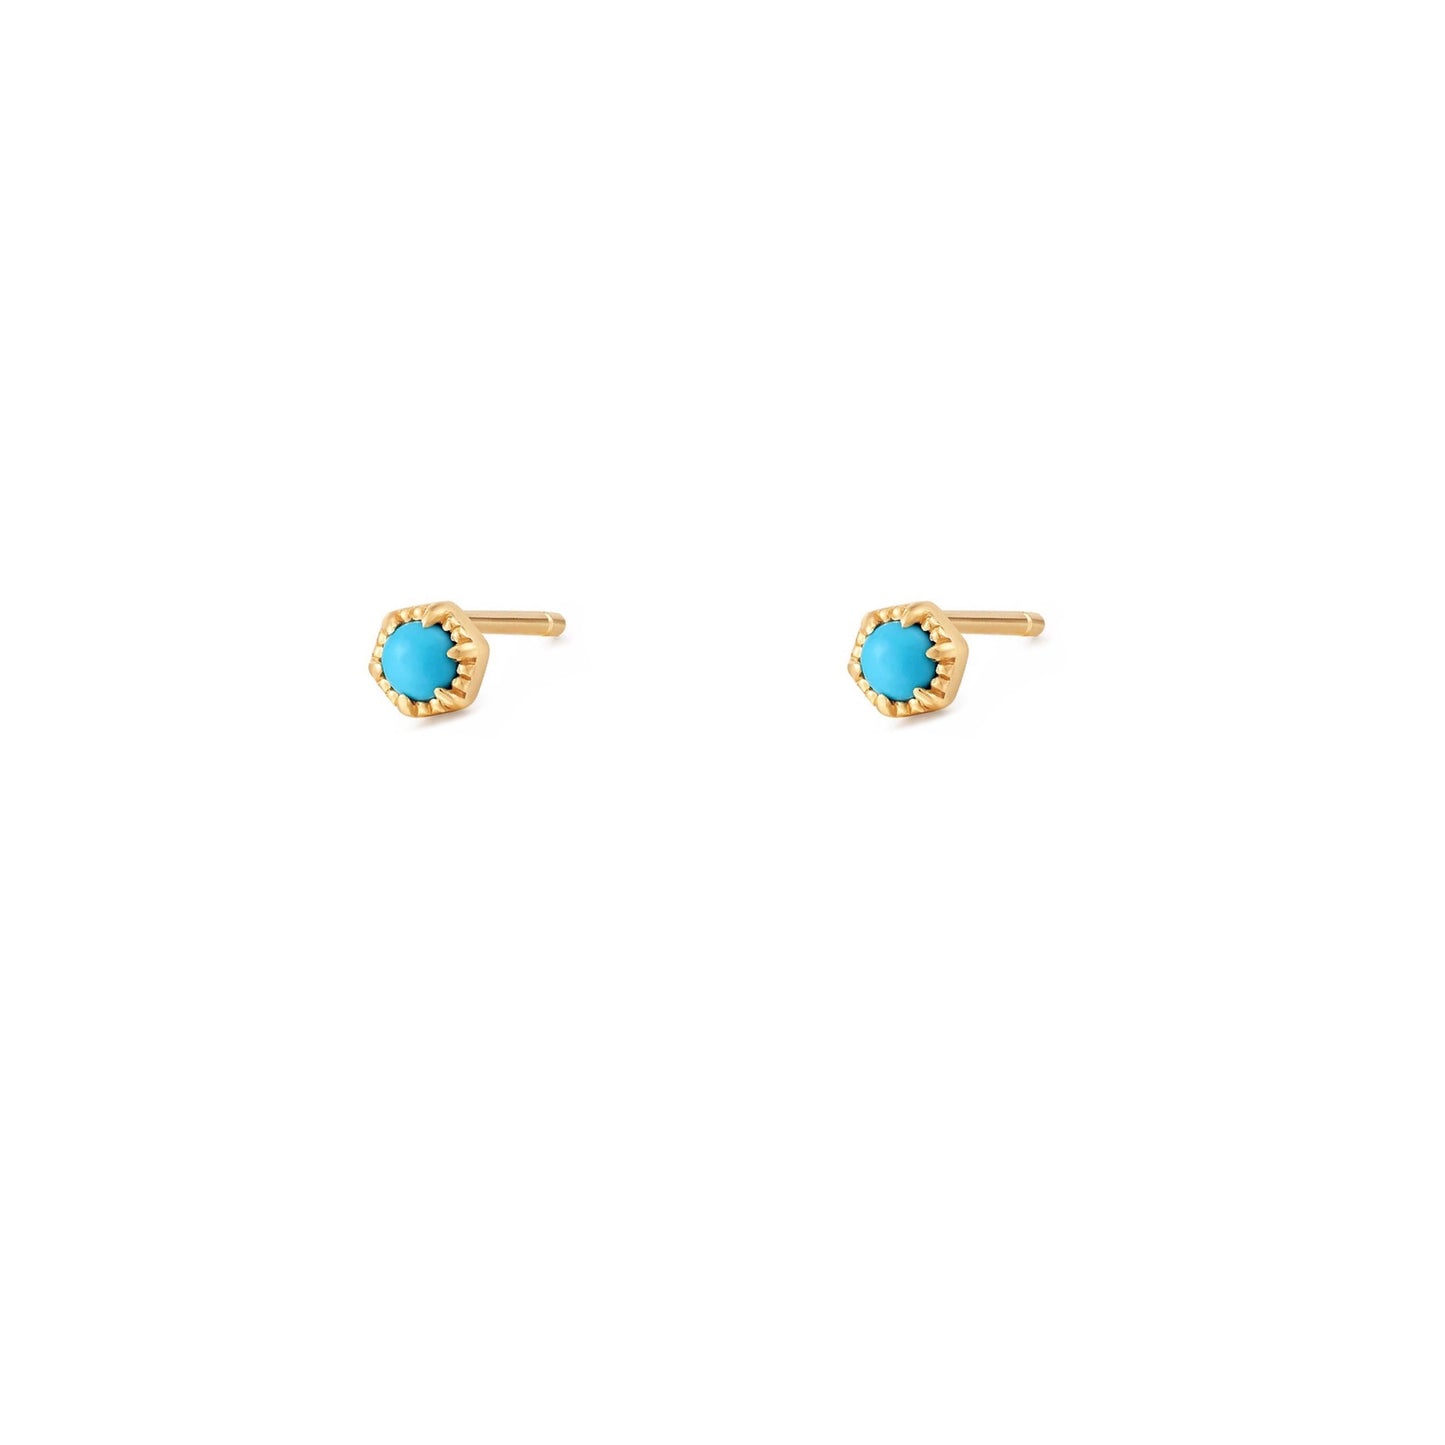 Gold Dainty Turquoise Round Stud Earrings